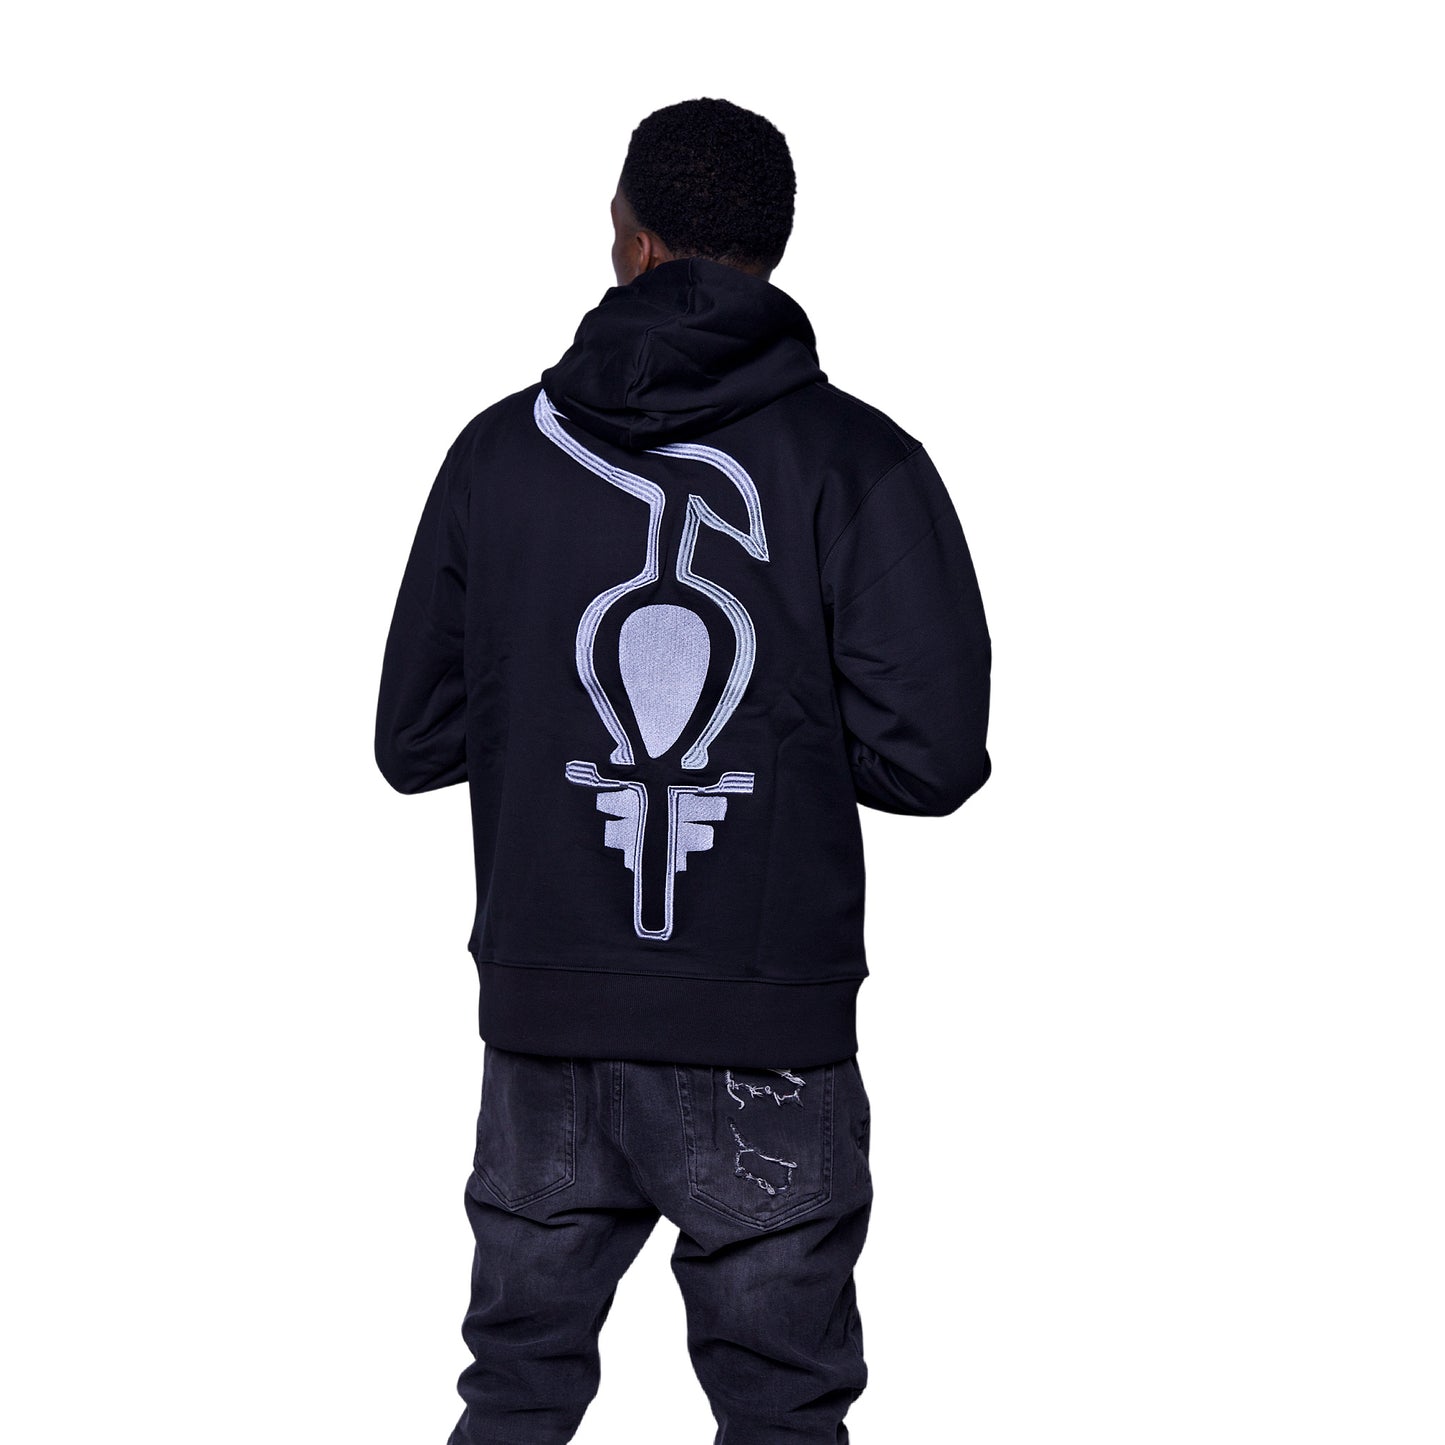 Wealth Staph of Ptah ™  3D Stitching Hoodie